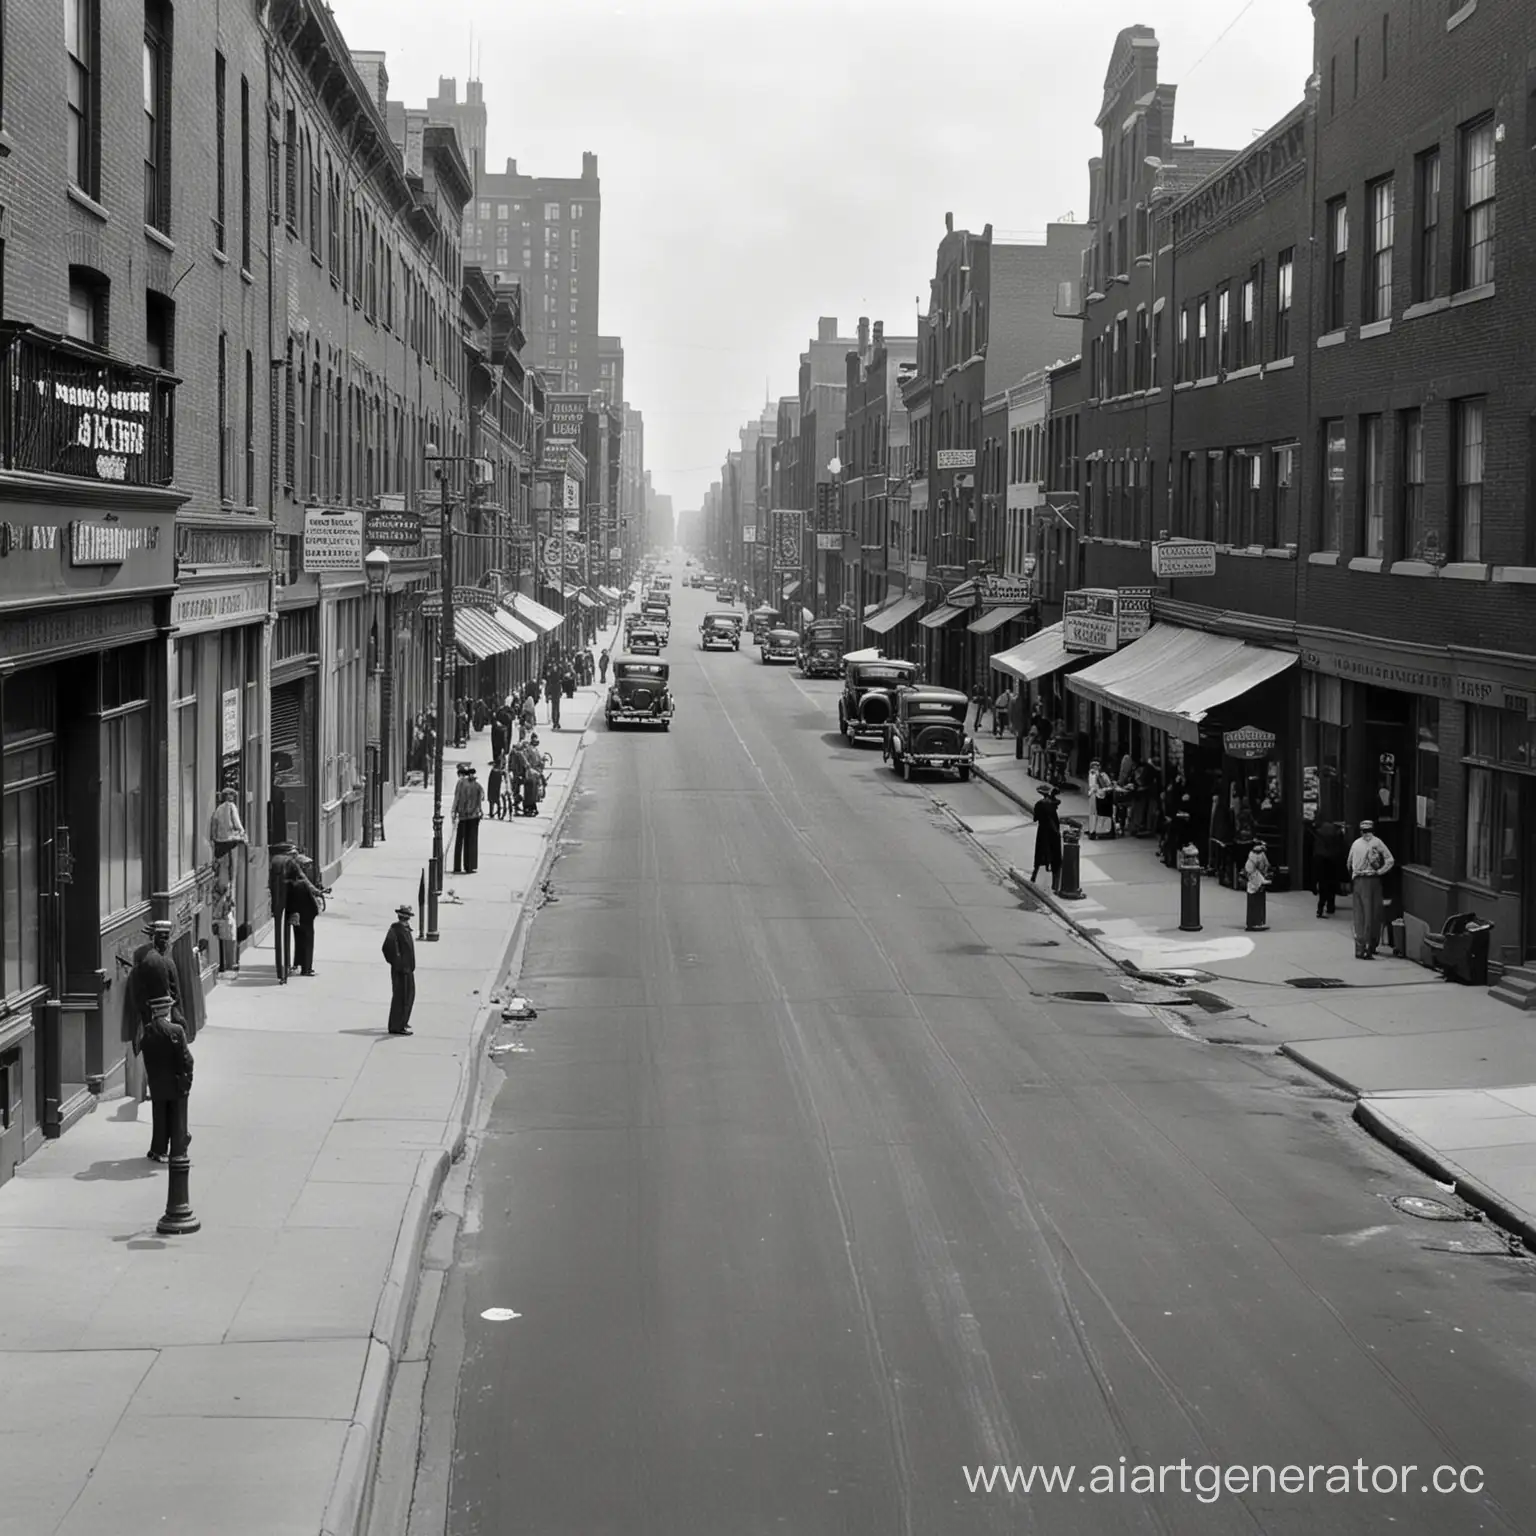 1930s-American-Street-Scene-Vintage-Black-and-White-Photograph